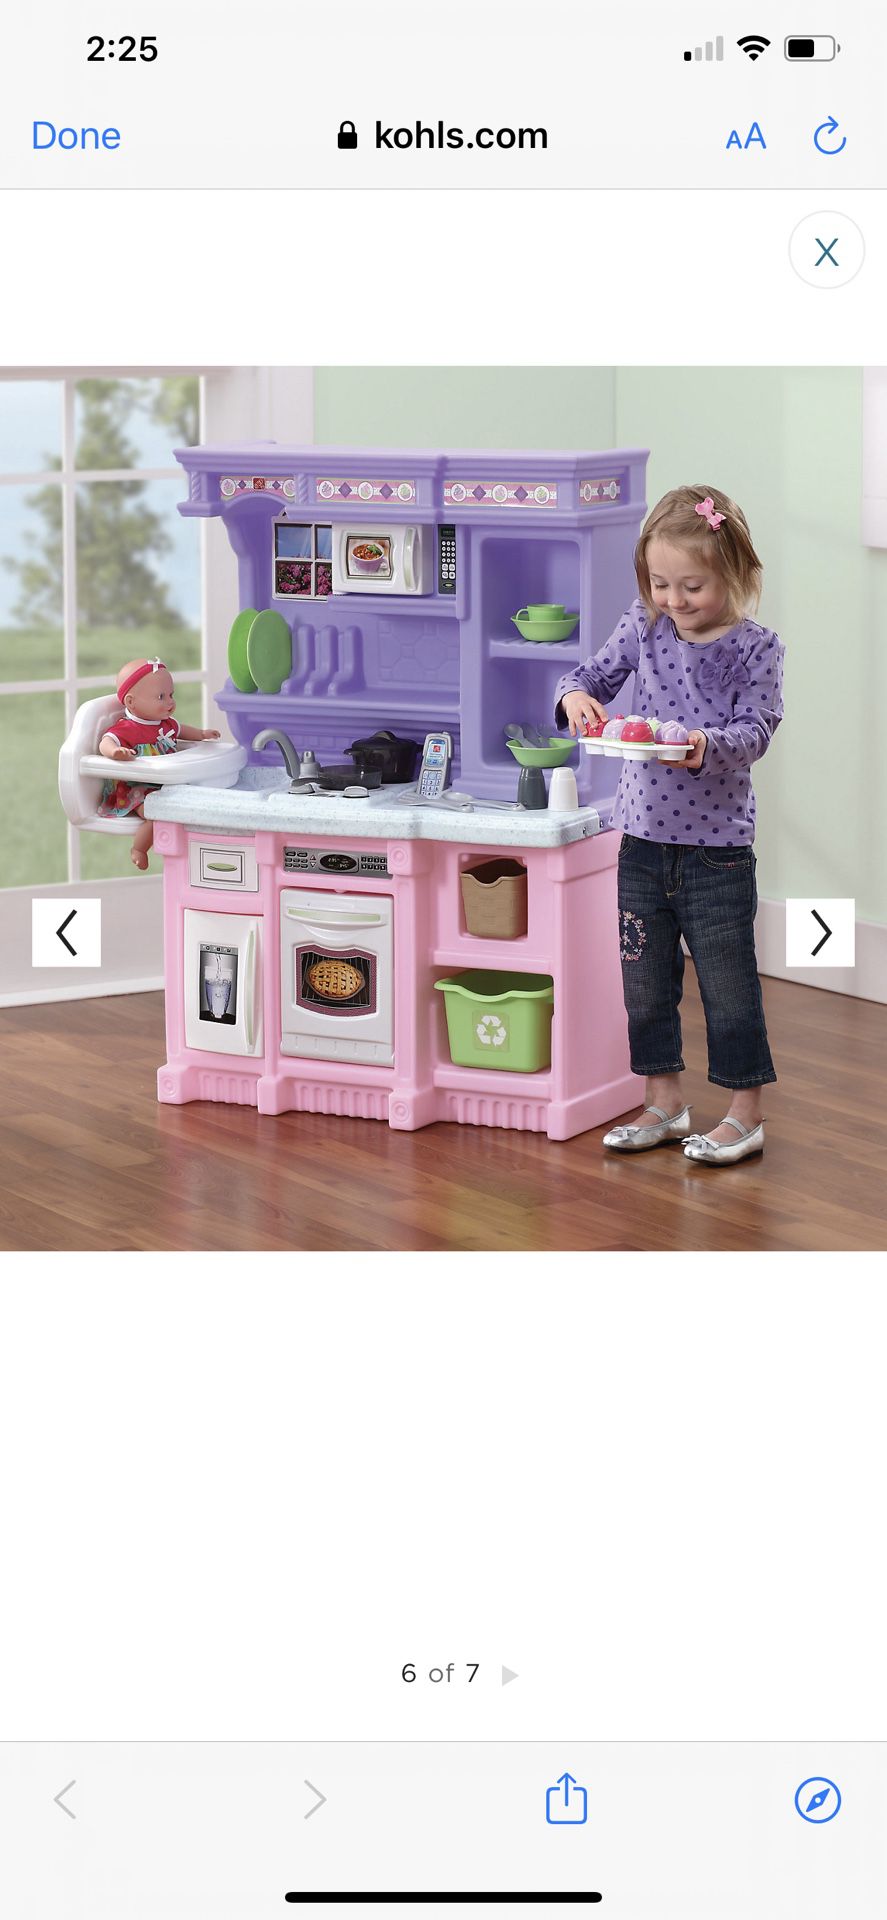 Black Friday Deal. Kids Kitchen Like New And Extra Kitchen Toys For Just 45$